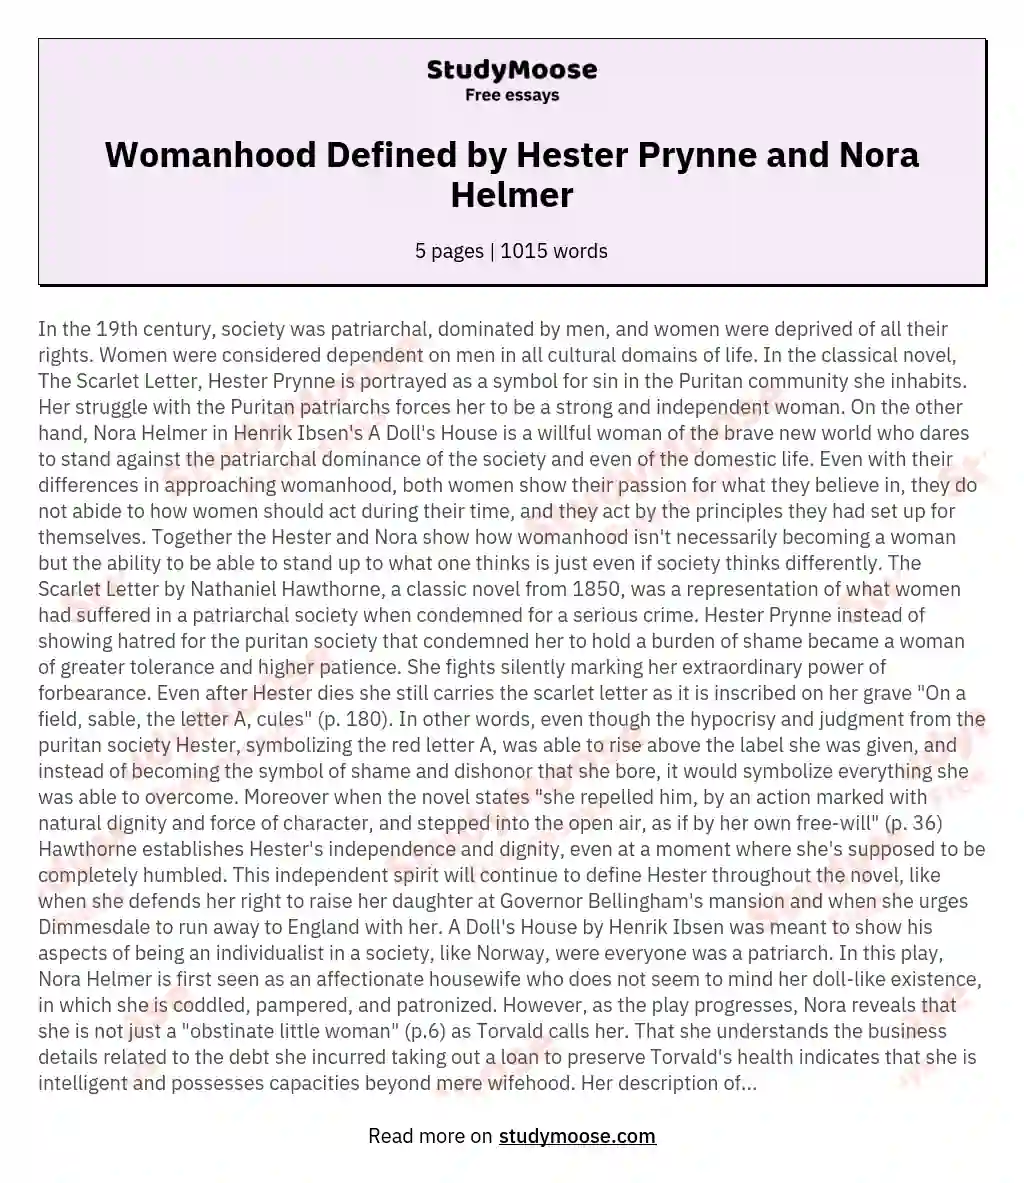 Womanhood Defined by Hester Prynne and Nora Helmer